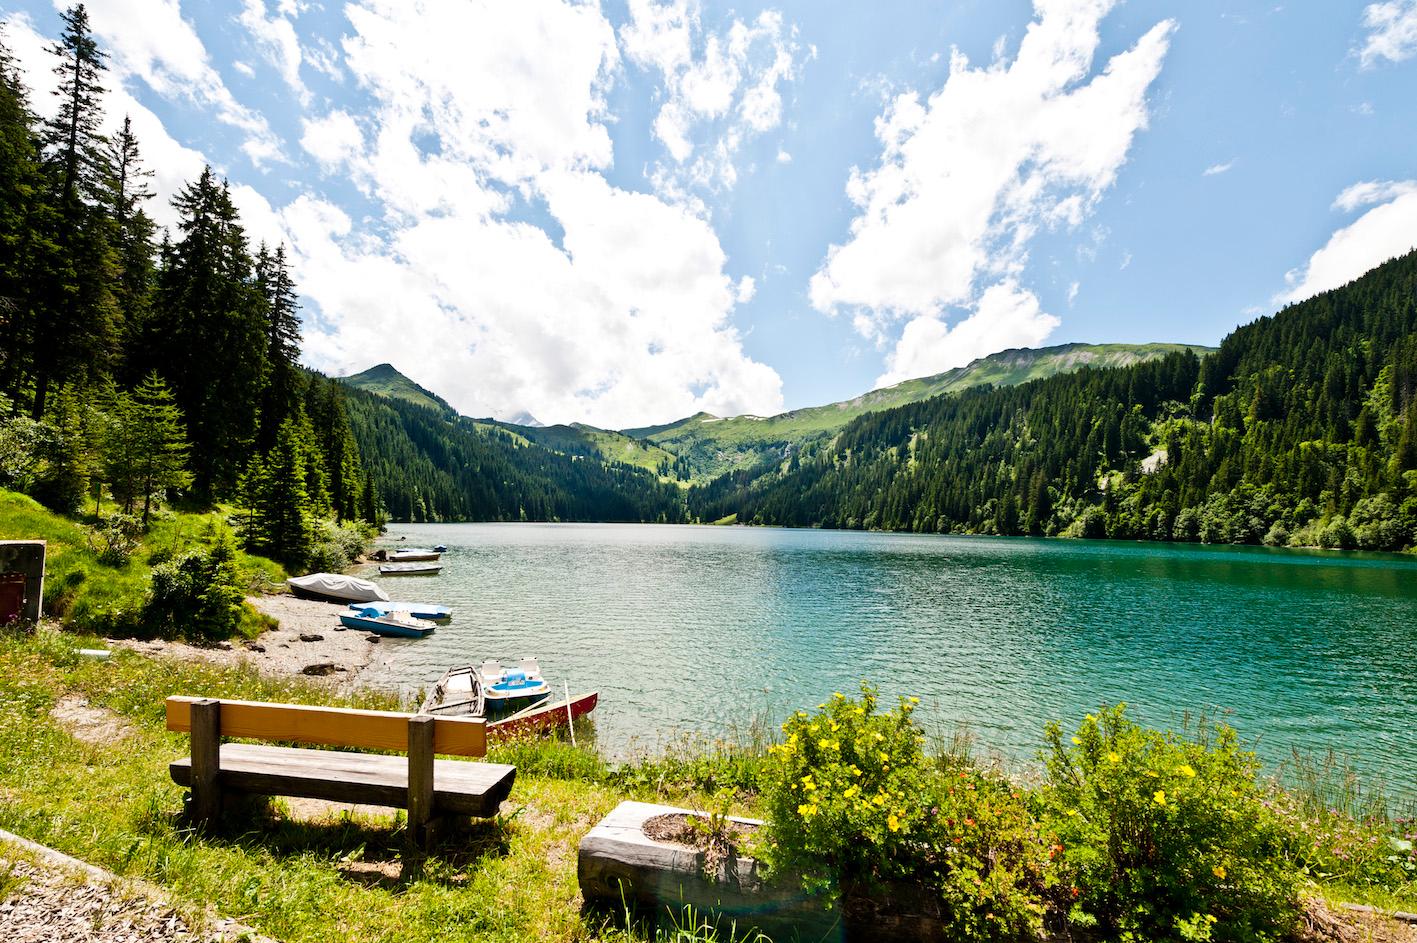 The programme kicks off with a wild swimming session in one of Gstaad’s picturesque mountain lakes / 